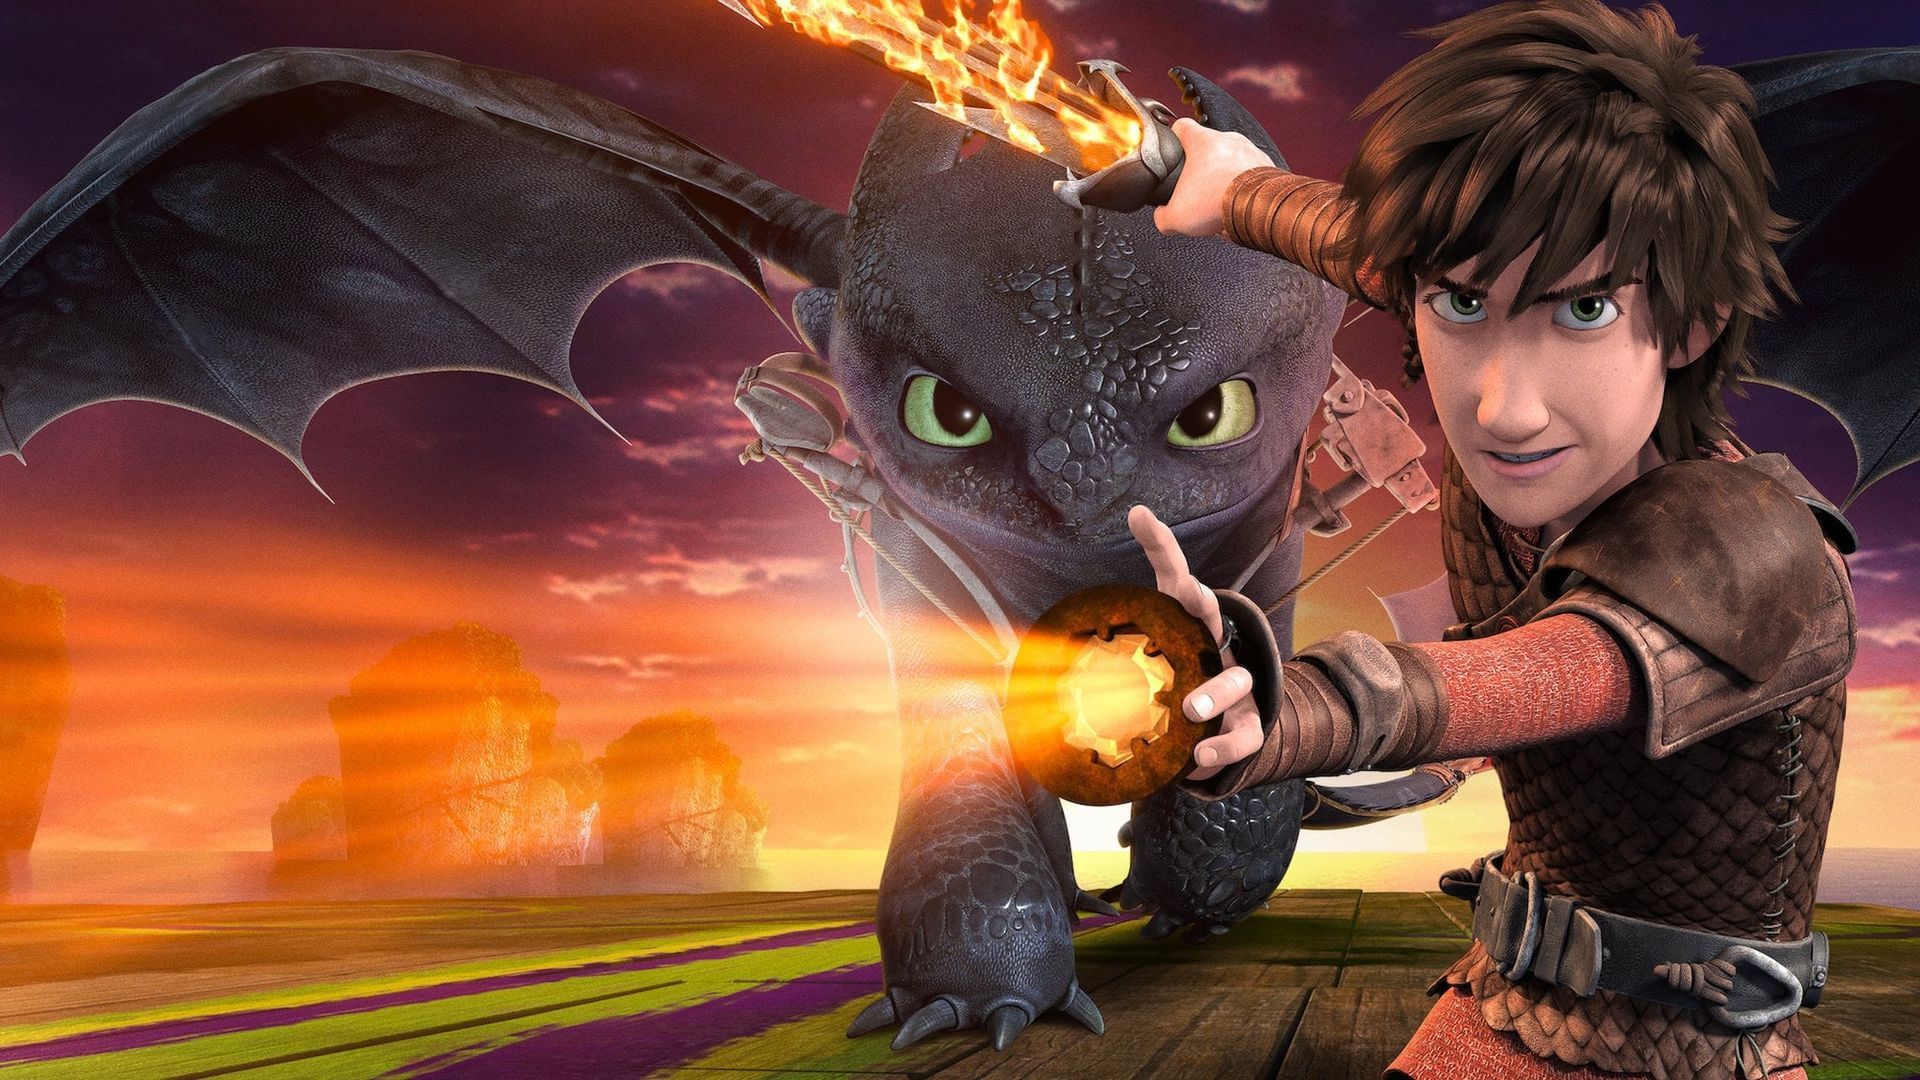 Dragons: Race to the Edge Season 2 Has Arrived